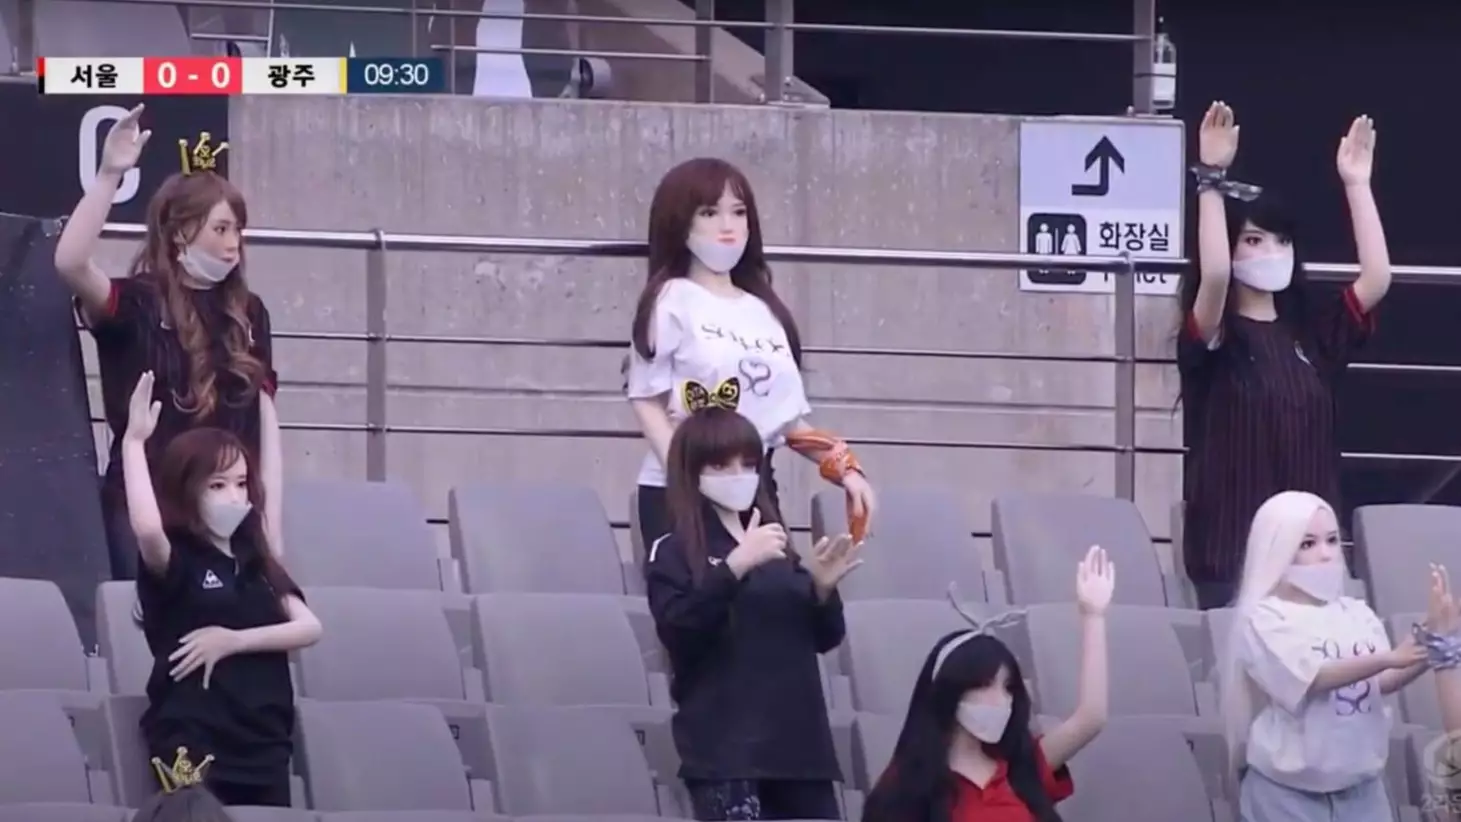 FC Seoul Have Placed Creepy Looking Plastic Dolls In The Stands